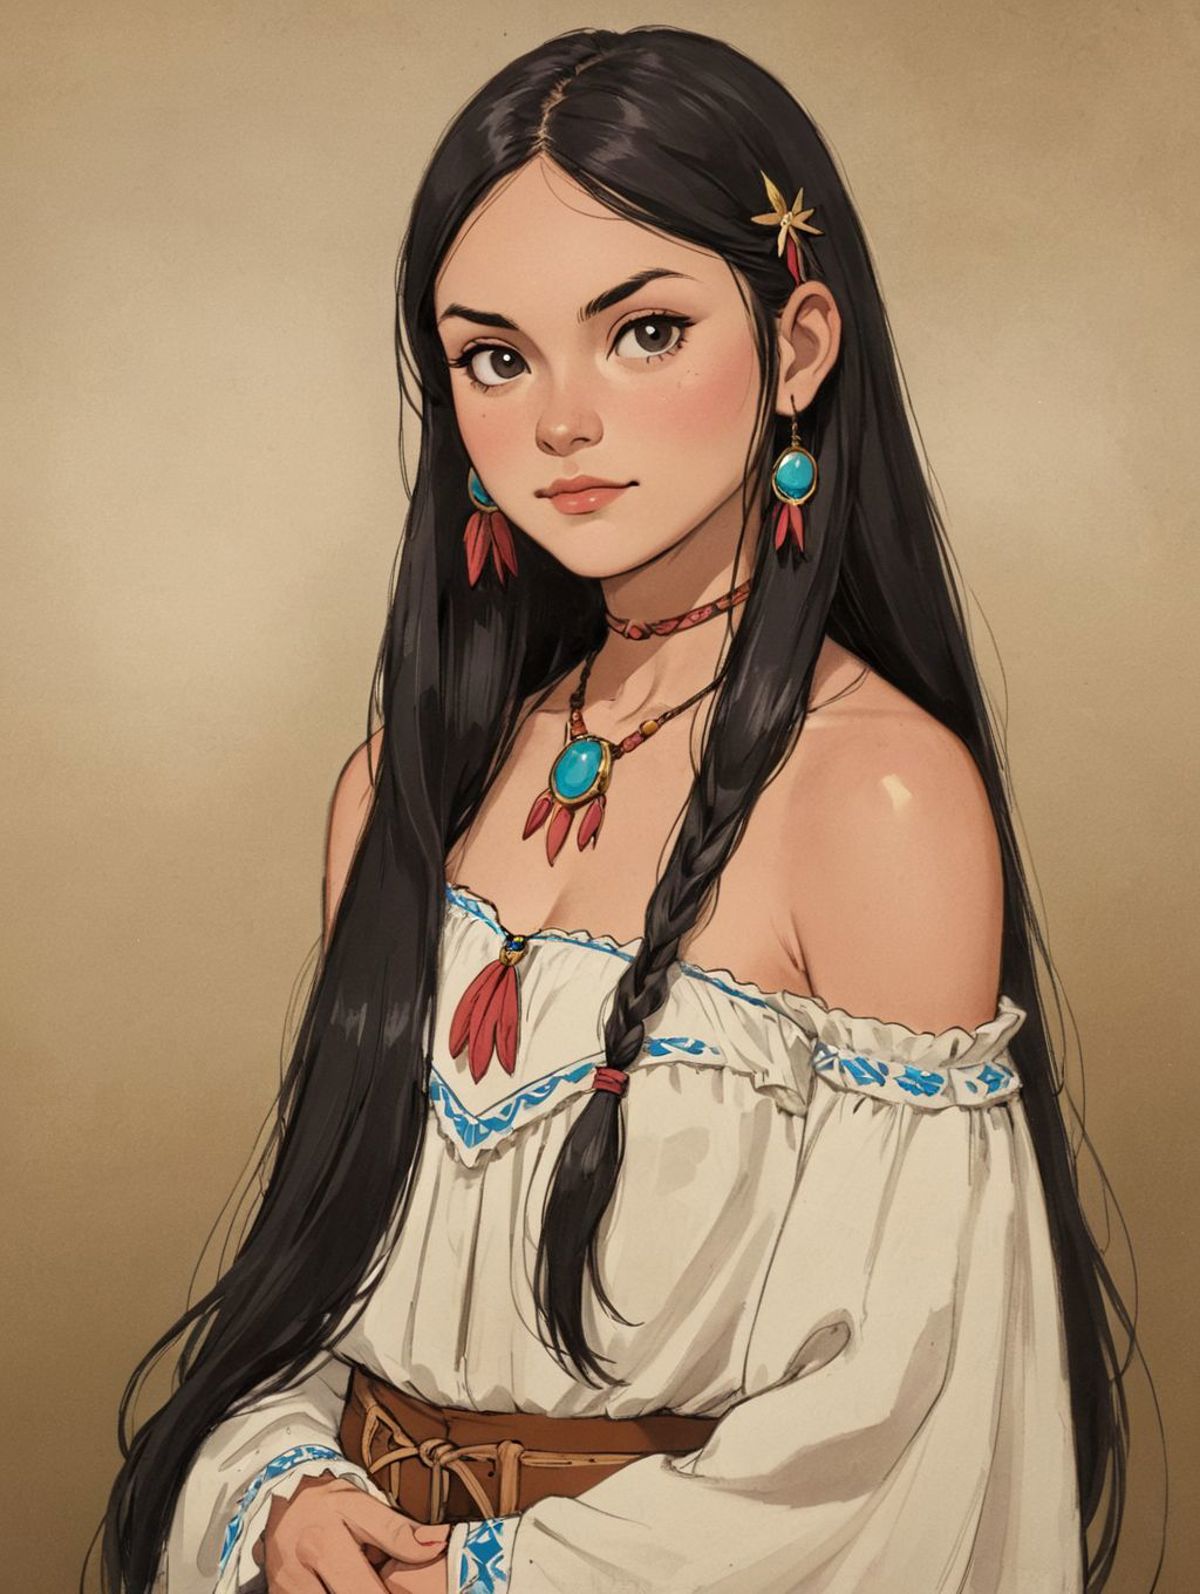 An illustration of a girl with long hair, wearing a white dress with blue accents, and accessories such as earrings and a necklace.